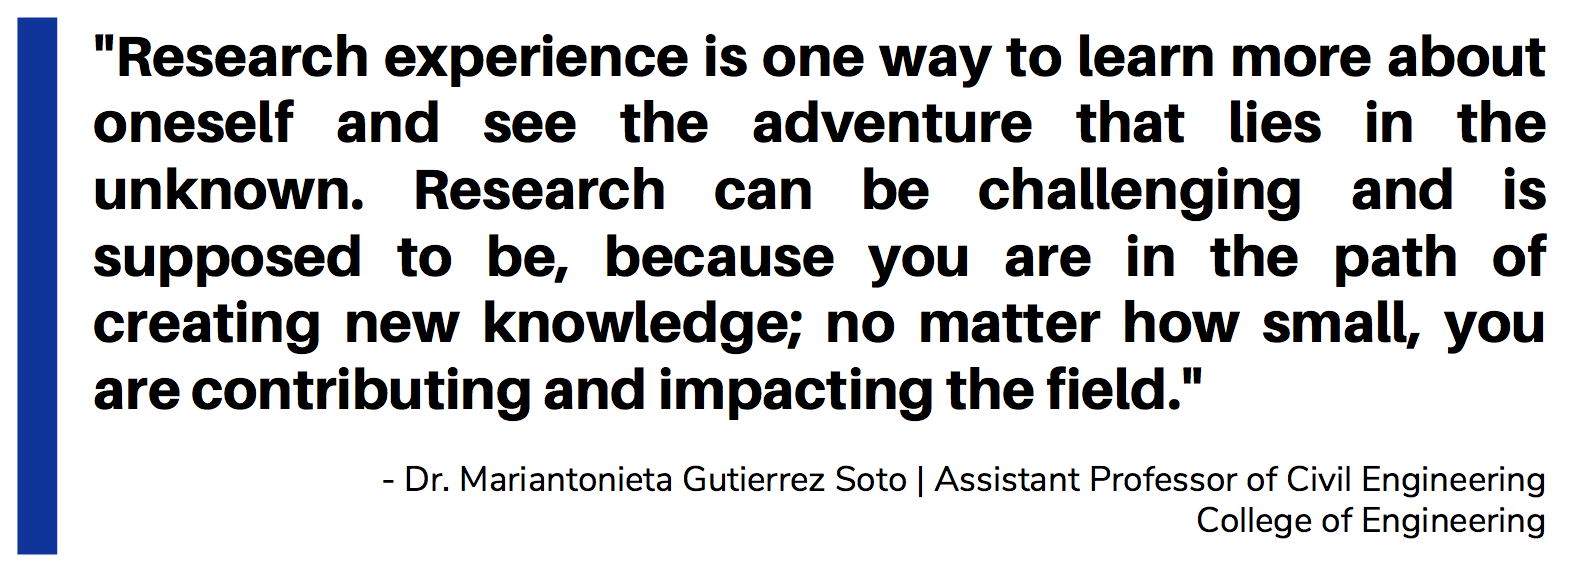 Quote_Gutierrez Soto_Research experience is one way to learn more about oneself and see the adventure that lies in the unknown. Research can be challenging and is supposed to be, because you are in the path of creating new knowledge; no matter how small, you are contributing and impacting the field.